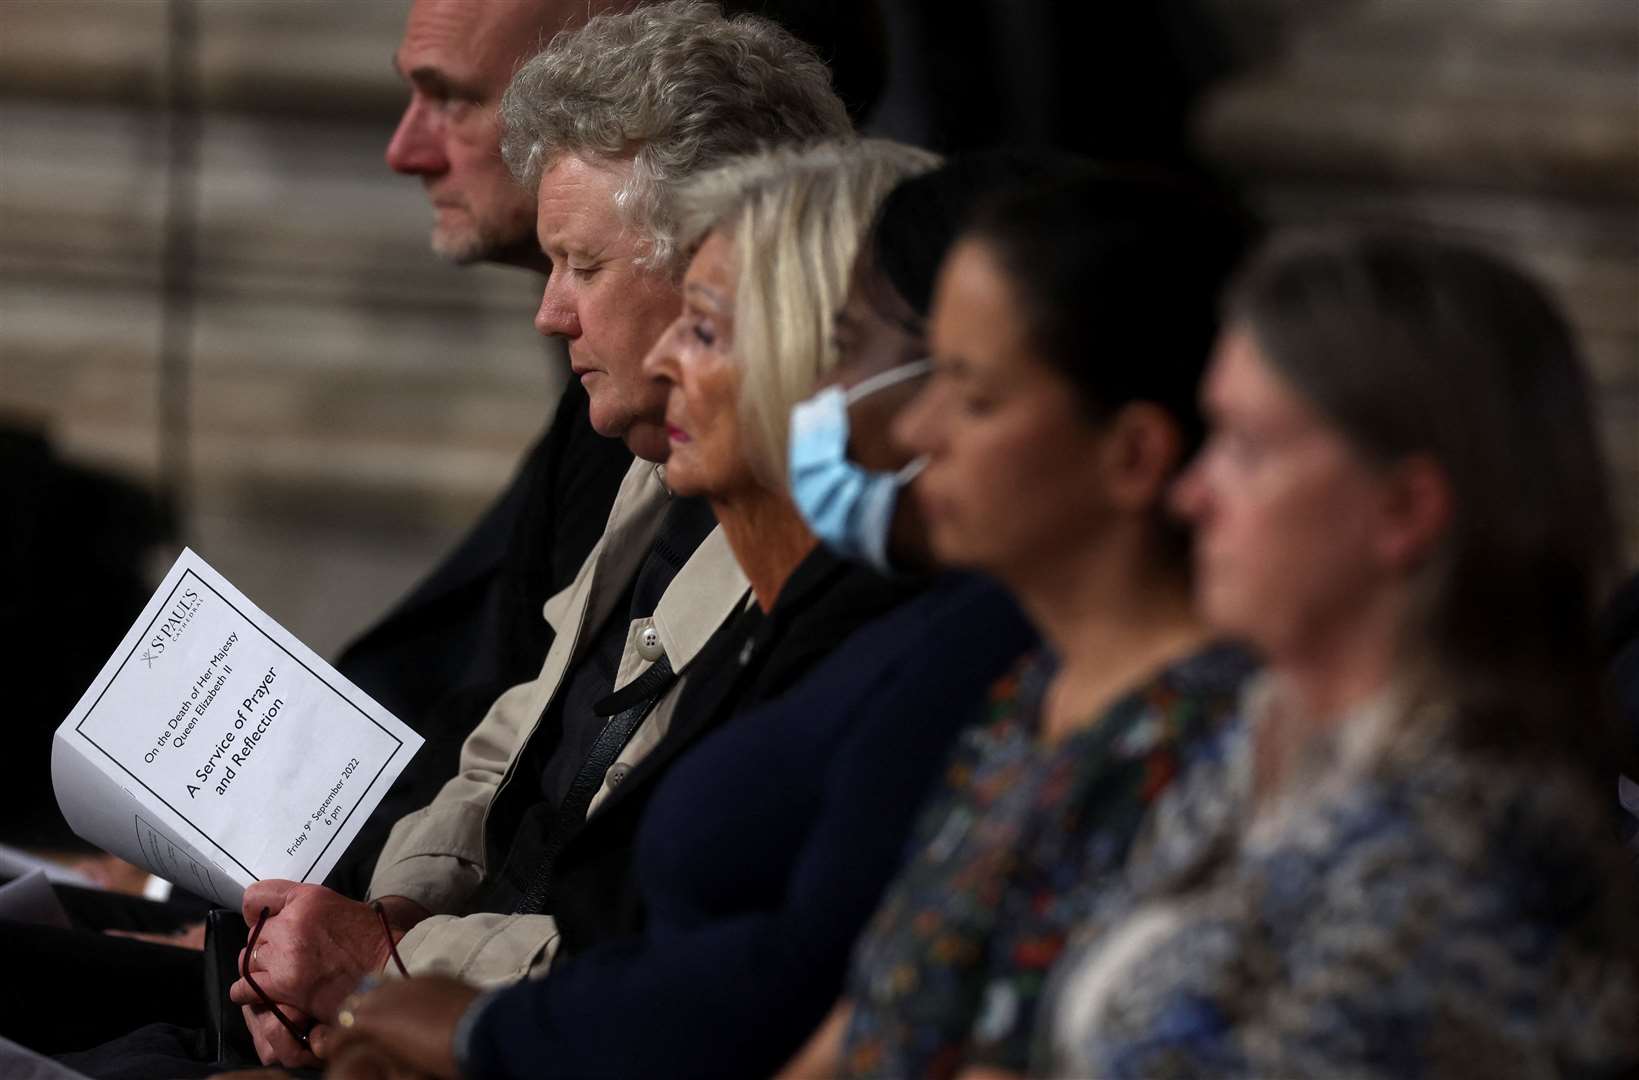 Members of the public attend the Service of Prayer and Reflection at St Paul’s Cathedral (Paul Childs/PA)